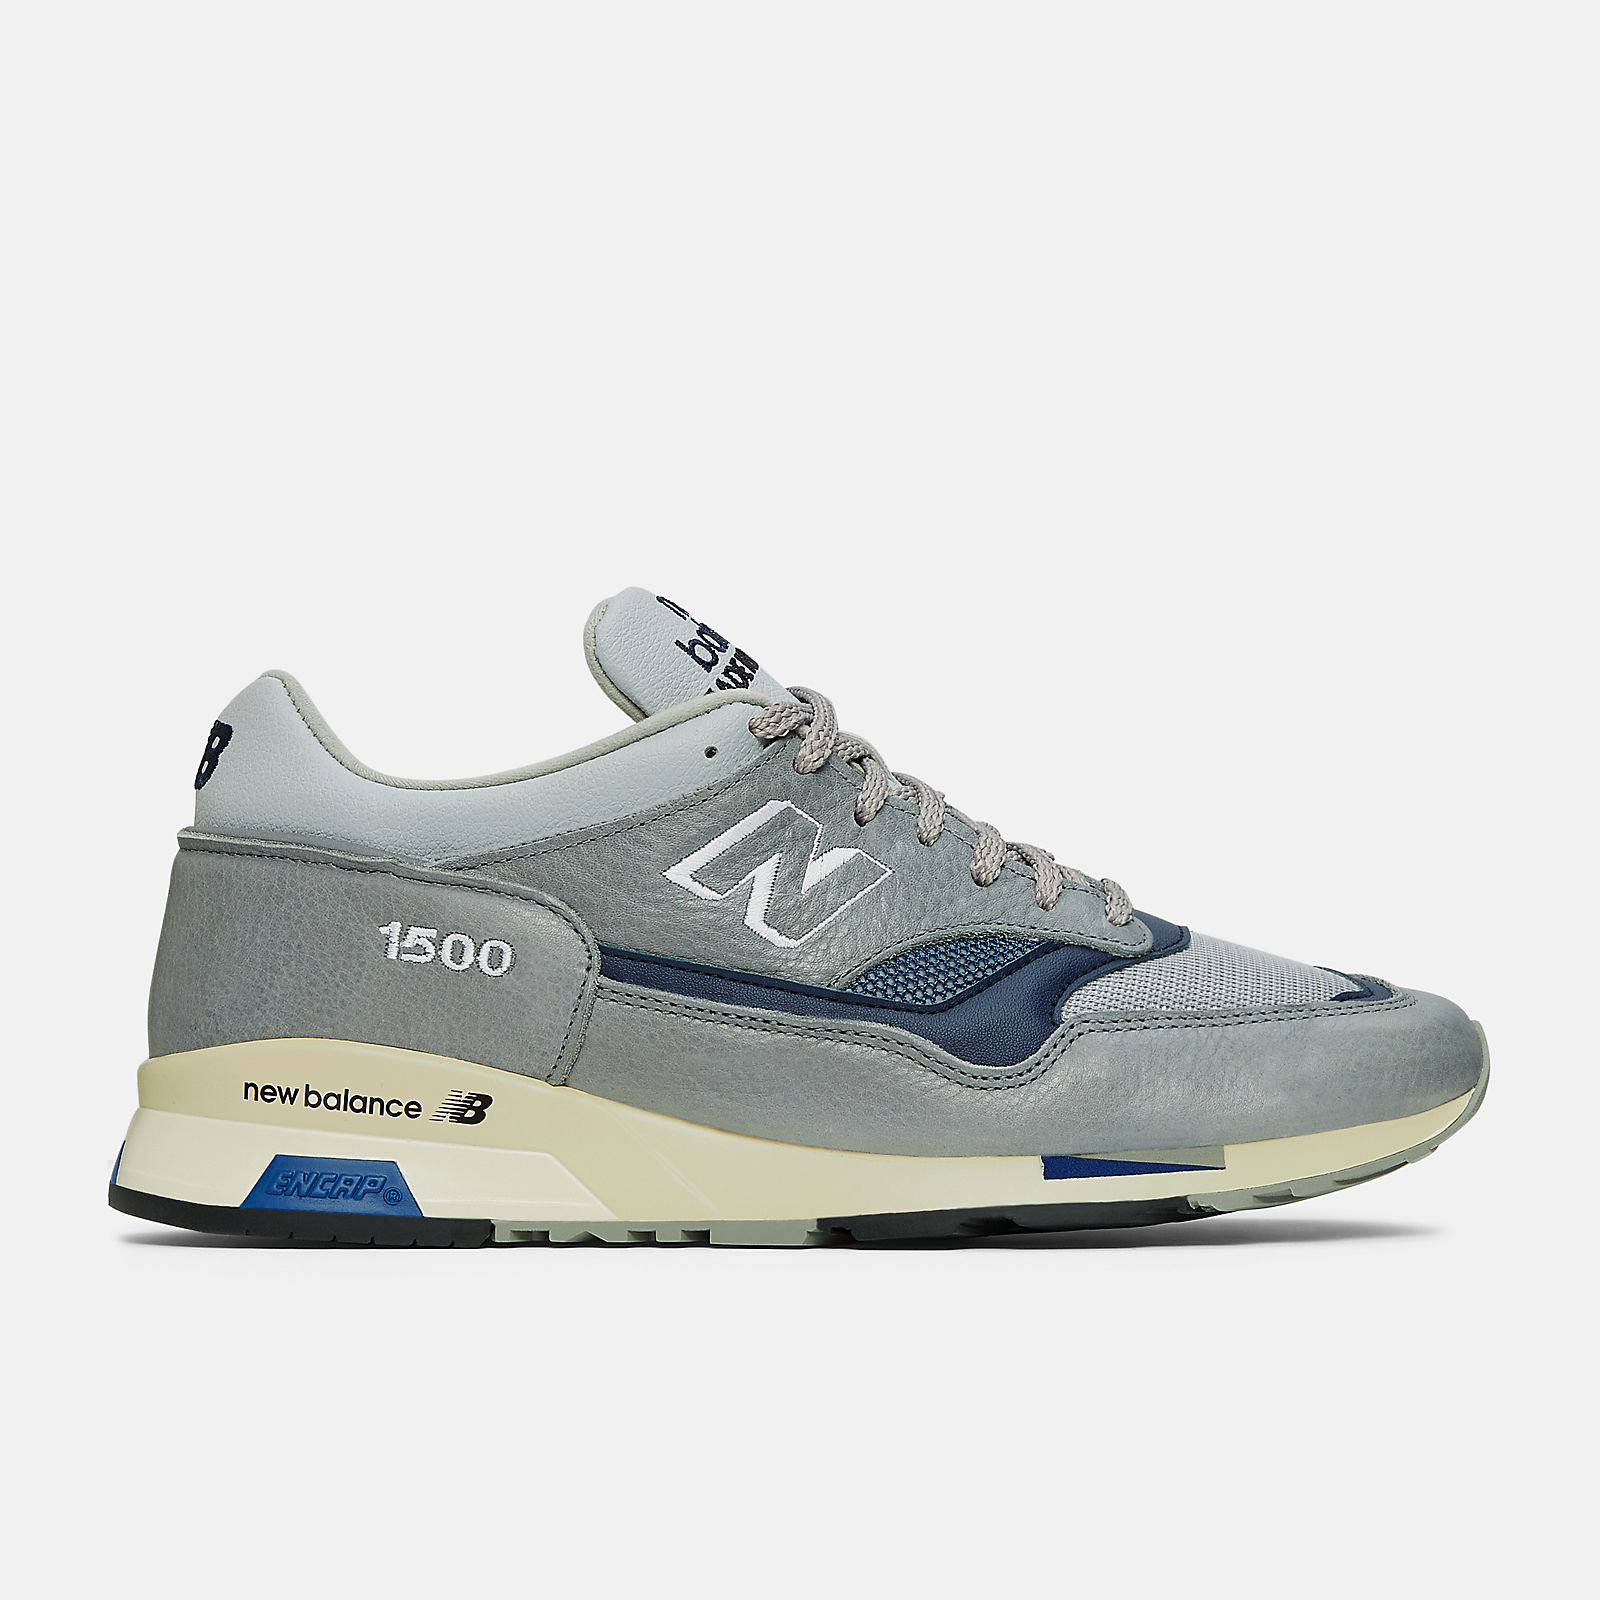 Nationale volkstelling overhemd Vouwen MADE in UK 1500 - New Balance